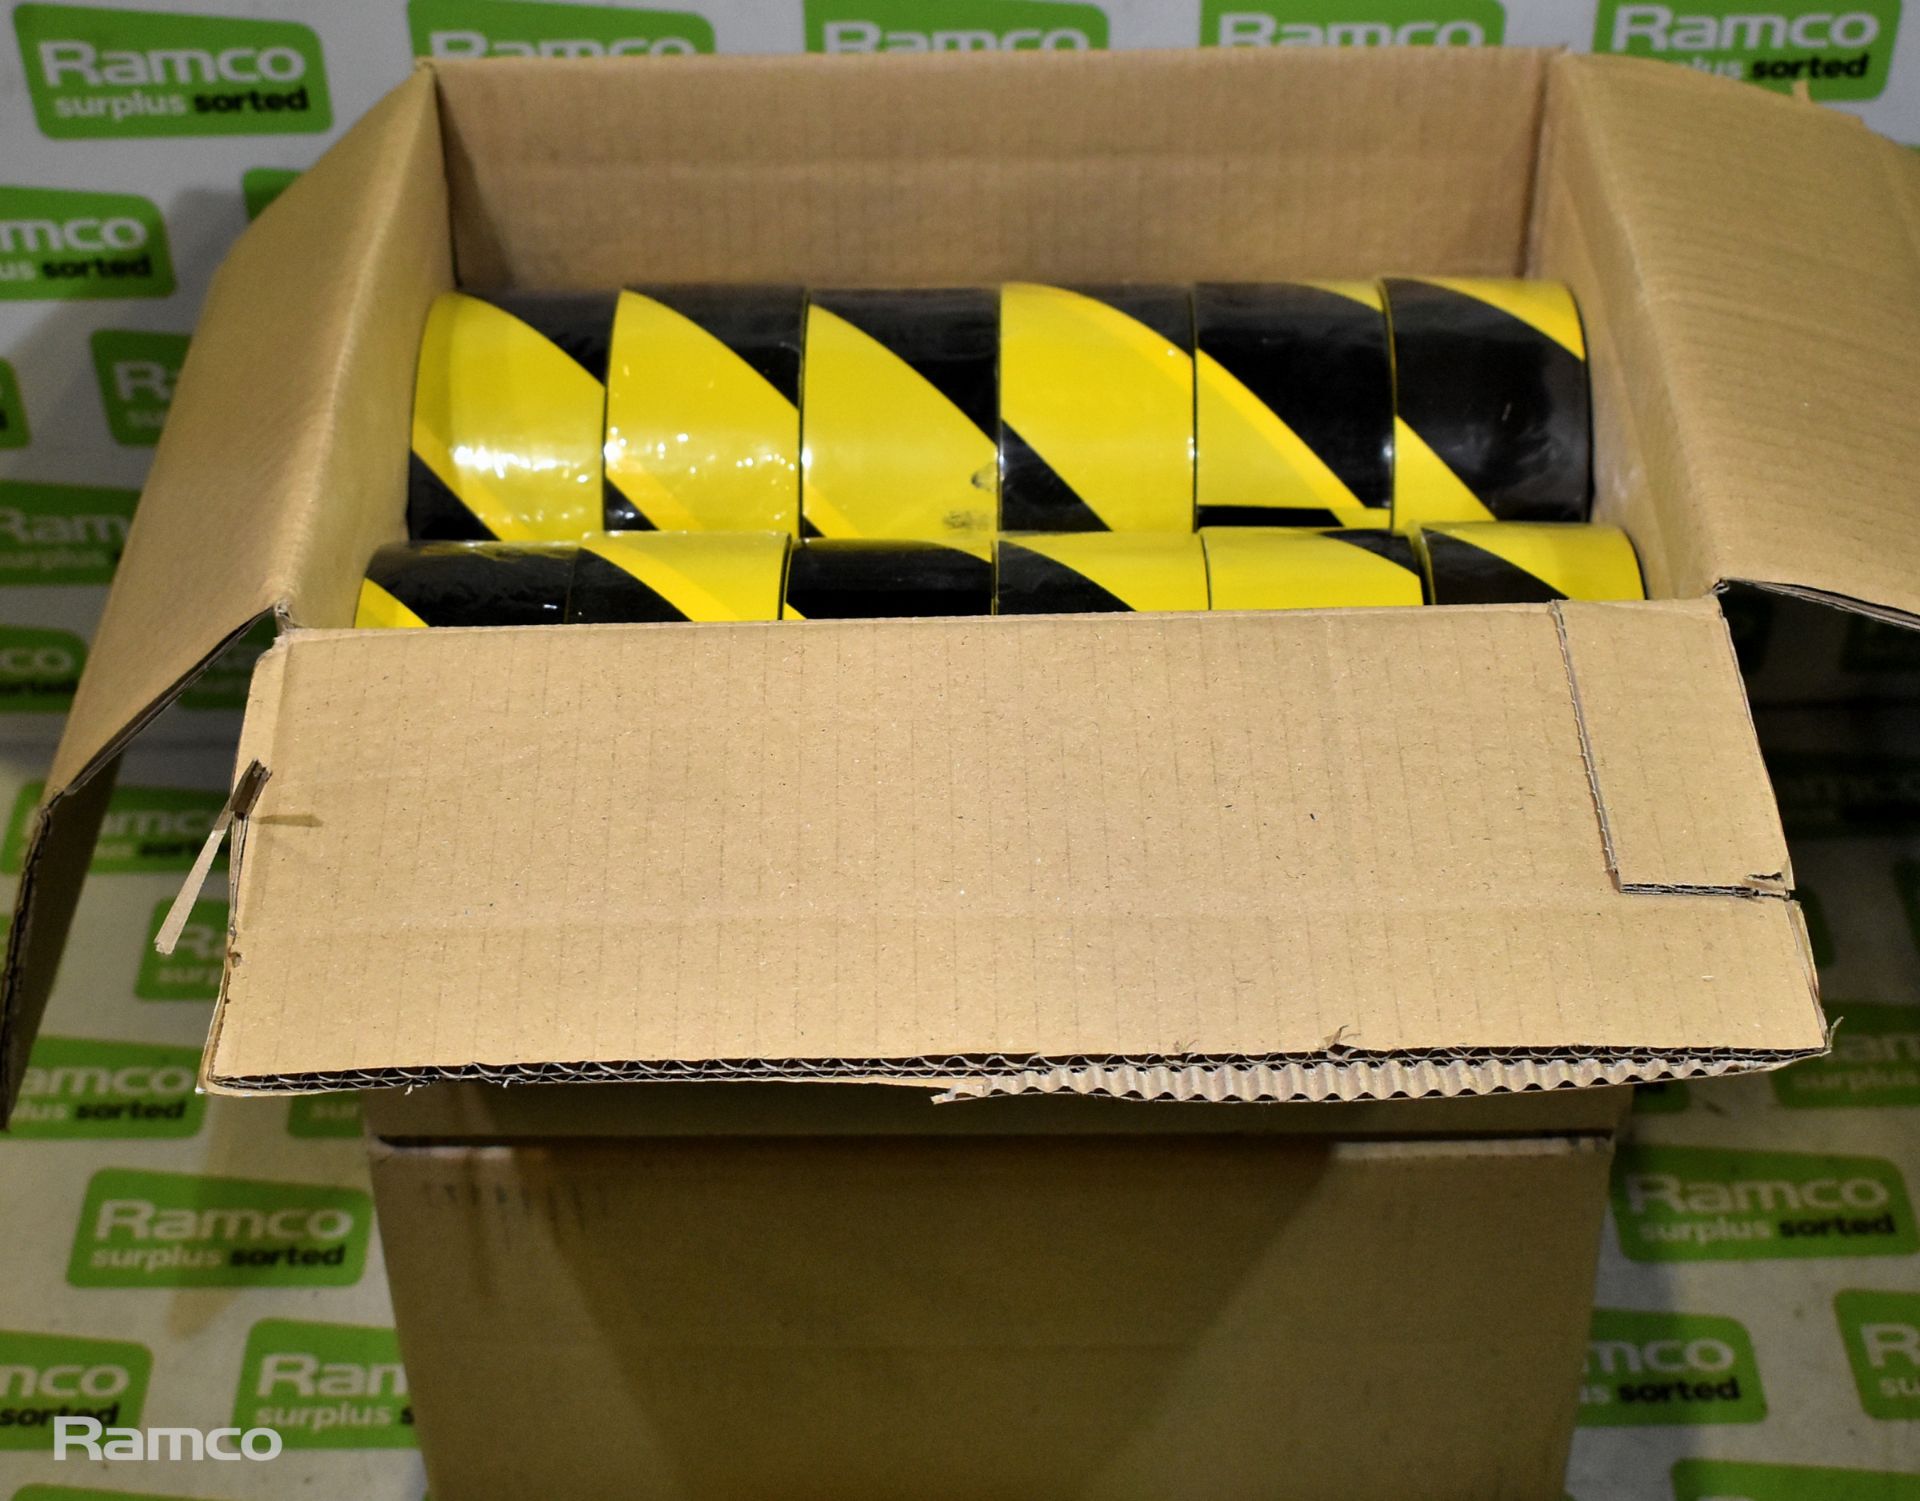 2x boxes of Black and yellow hazard tape - 12 rolls per box